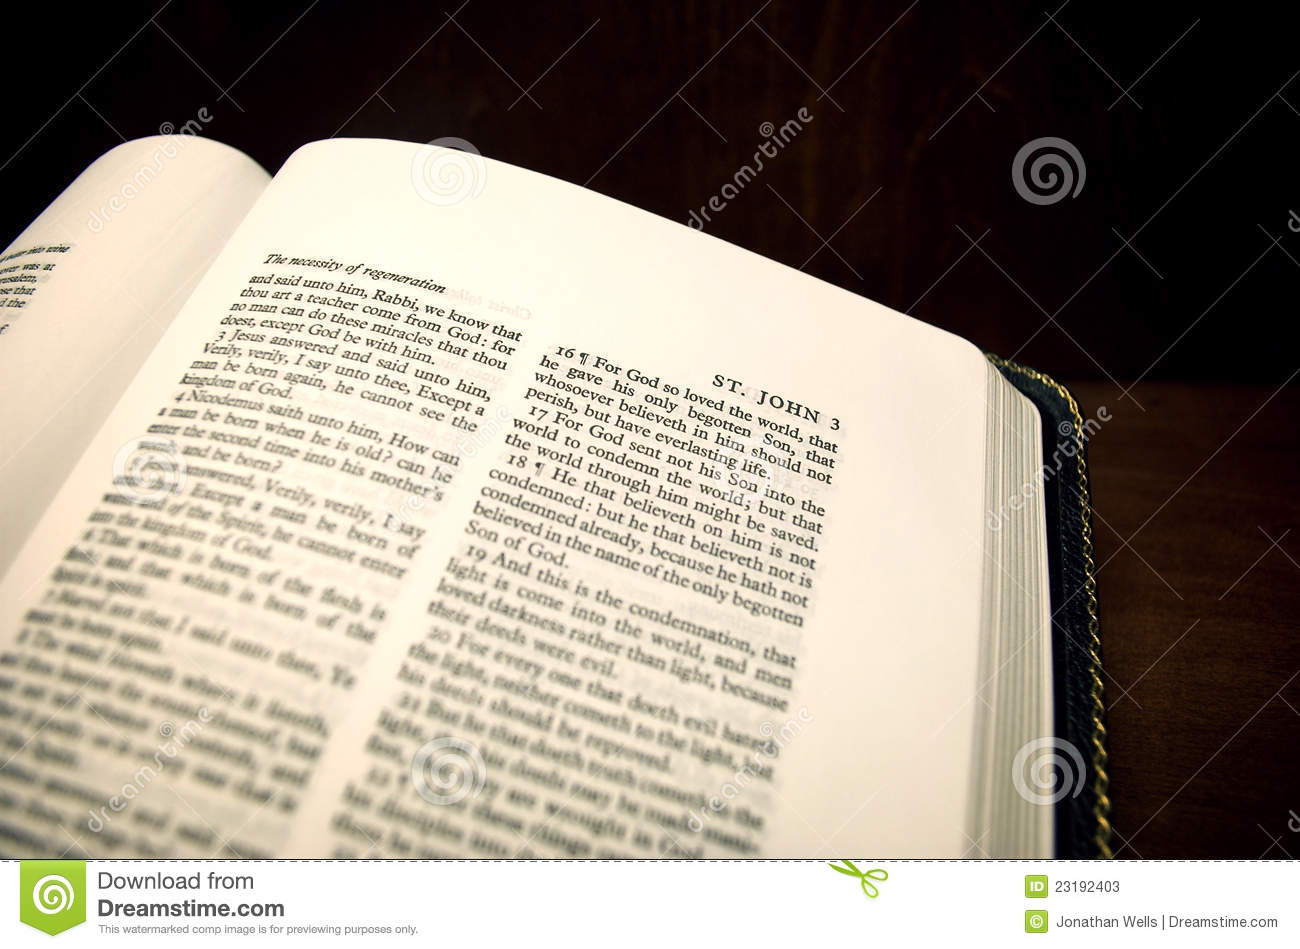 Bible Opened To John 3 16  For God So Loved The World